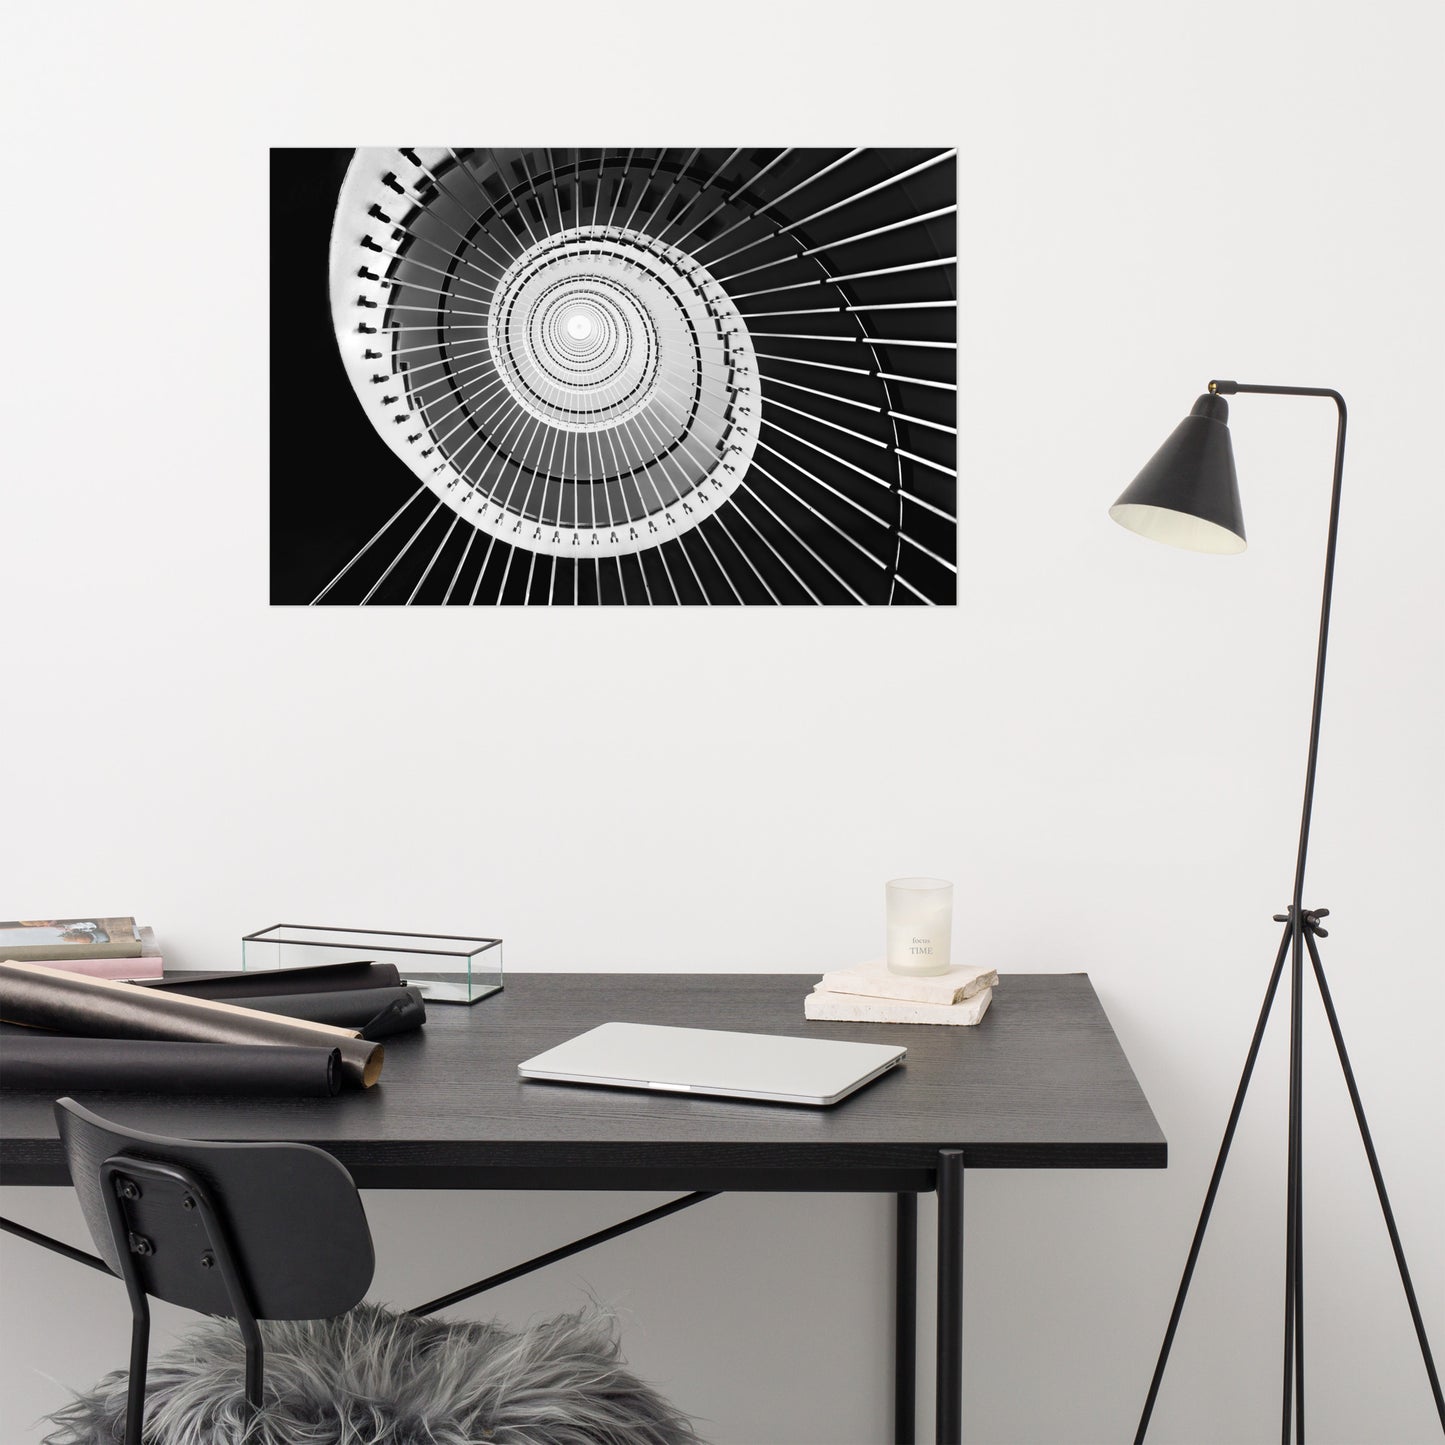 Black and White Architectural Photos: Never Ending Ascent - Equiangular Spiral Staircase Frameable Art Print